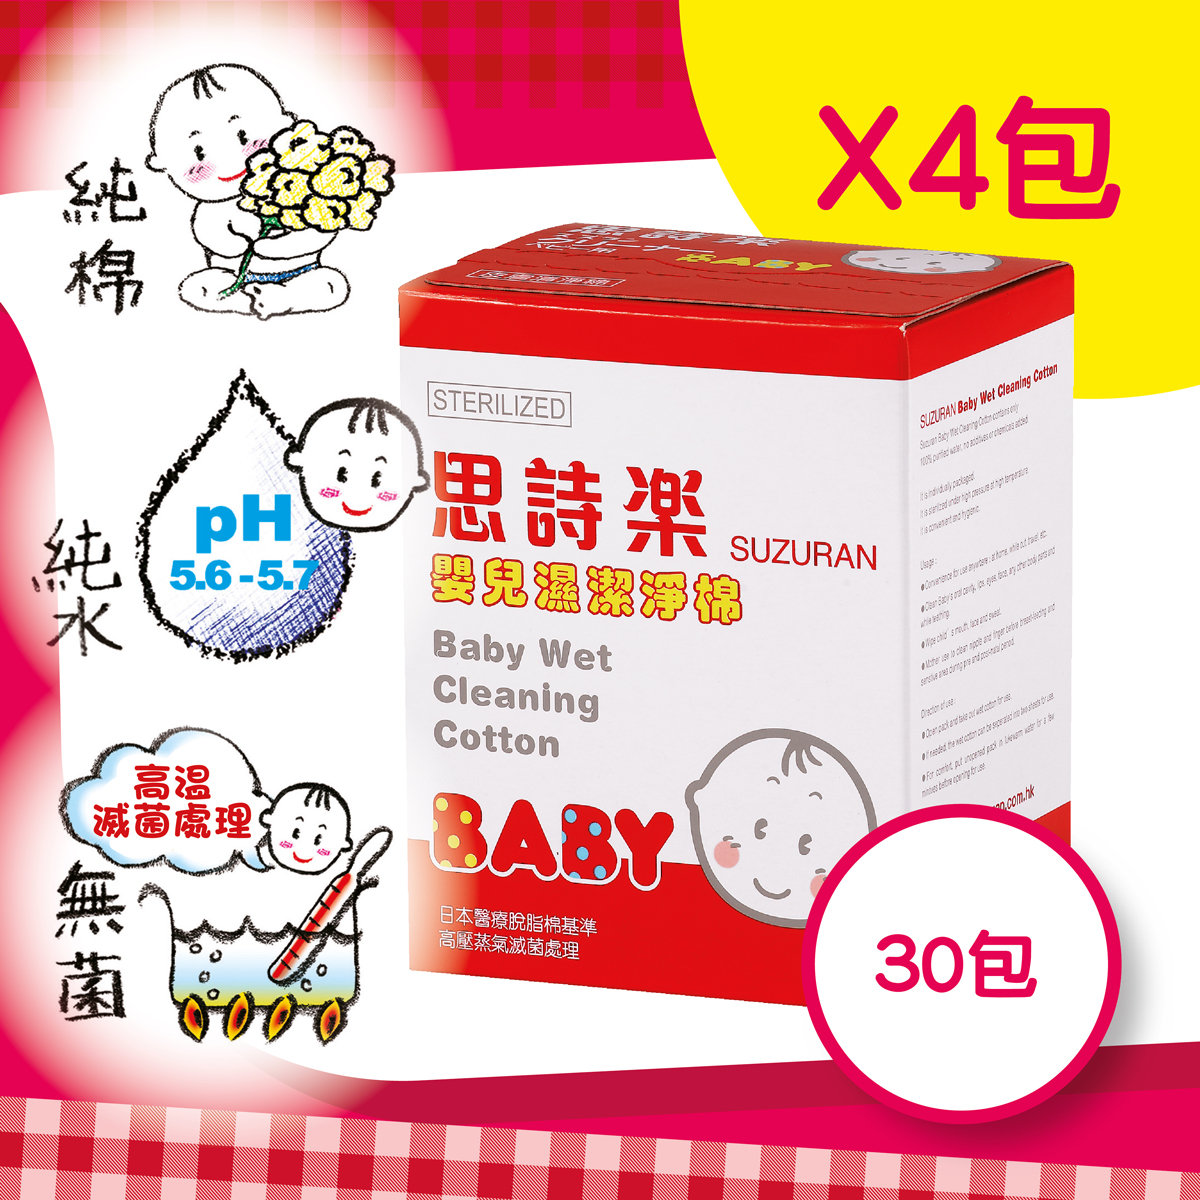 [4packs combo]Baby Wet Cleaning Cotton